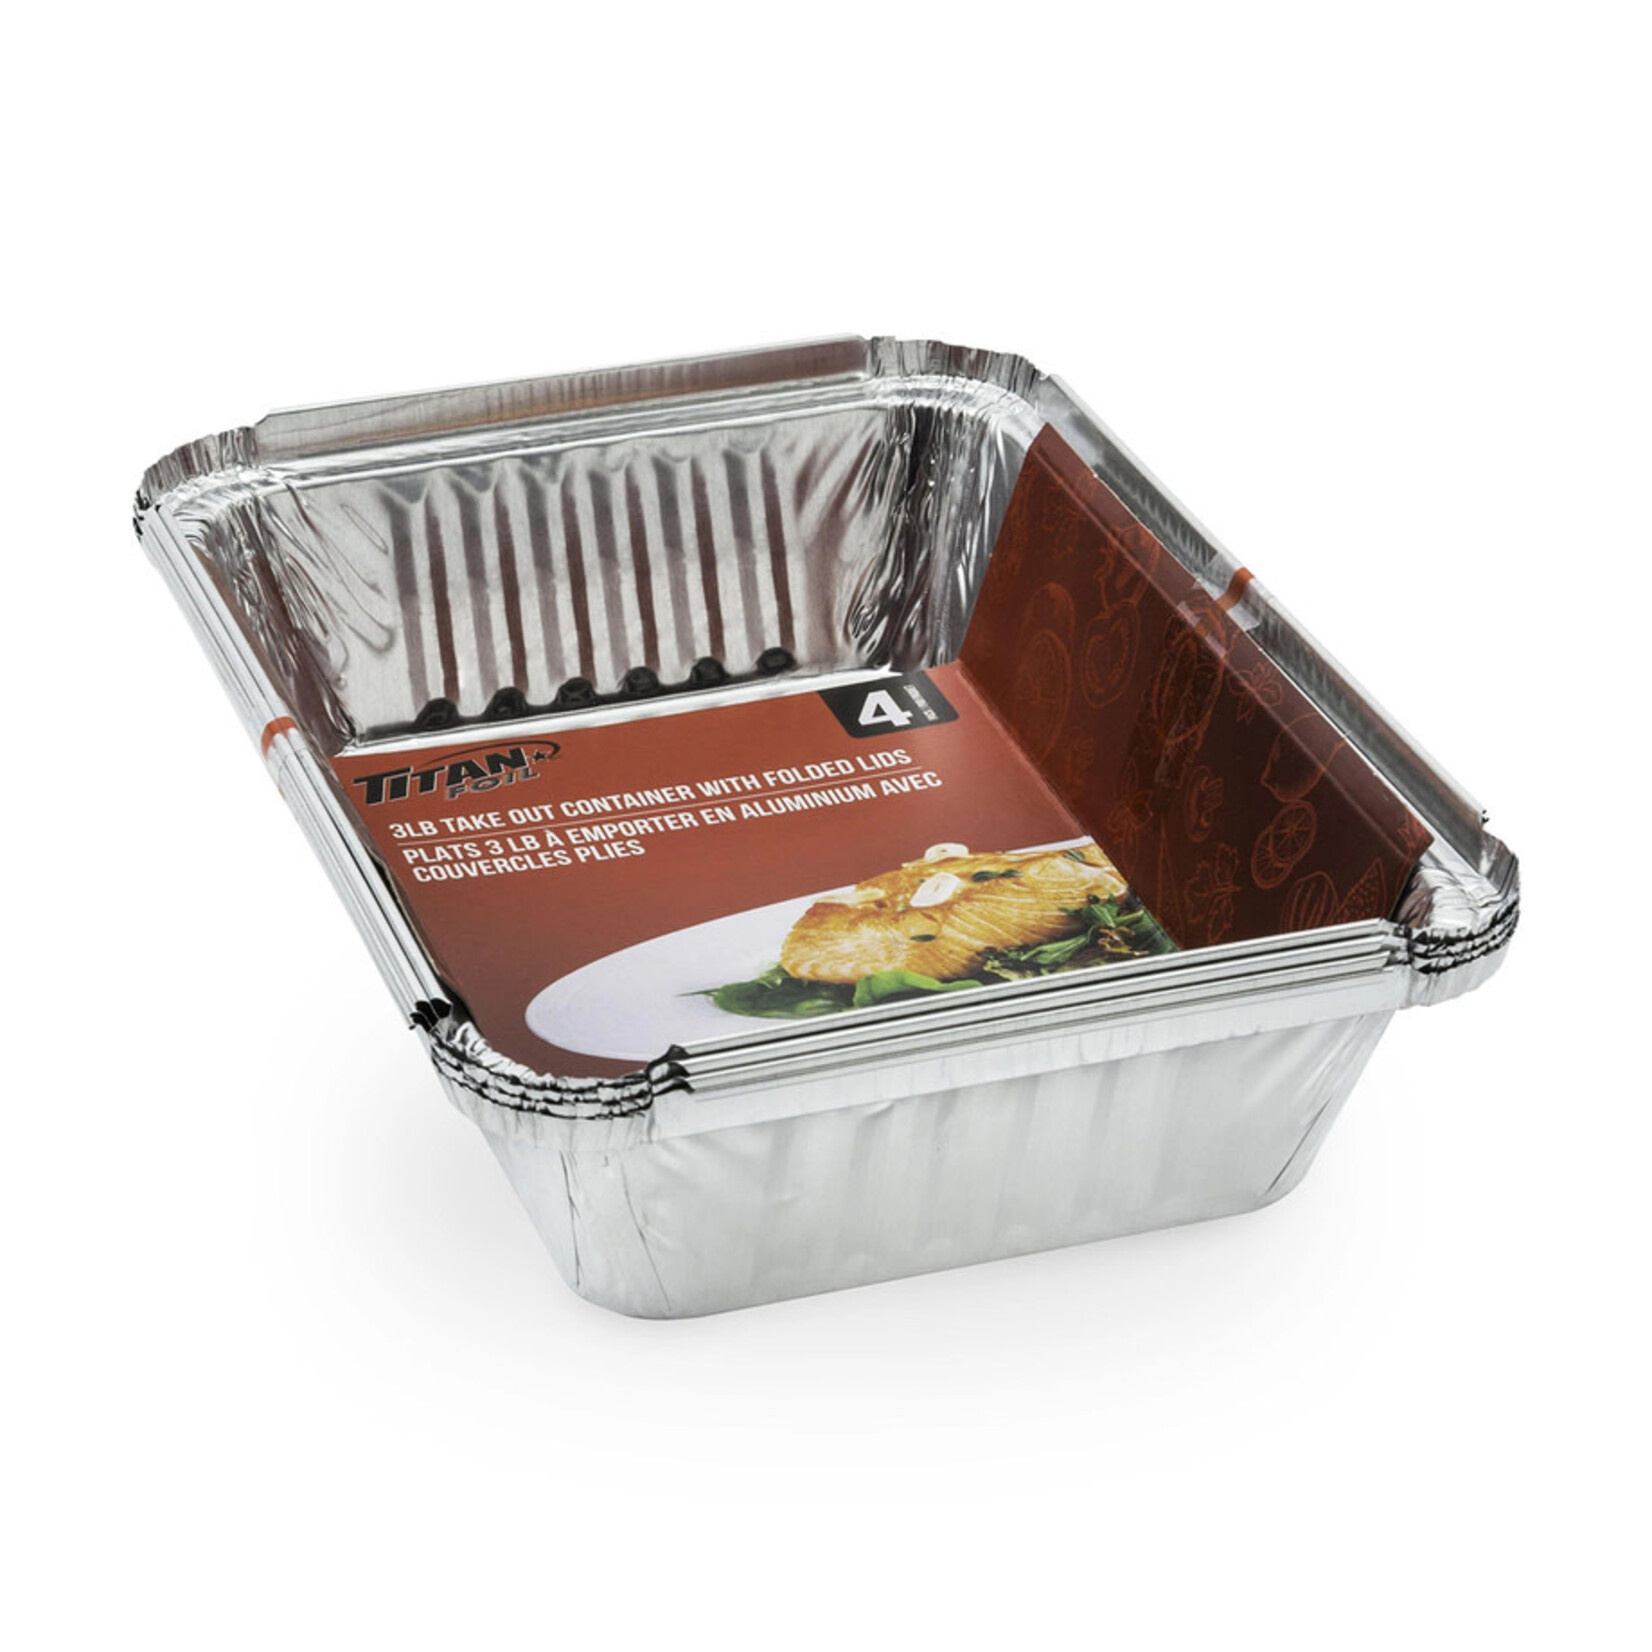 3 LB TAKE OUT CONTAINER/FOLDED LIDS 4/PK - SINGLE